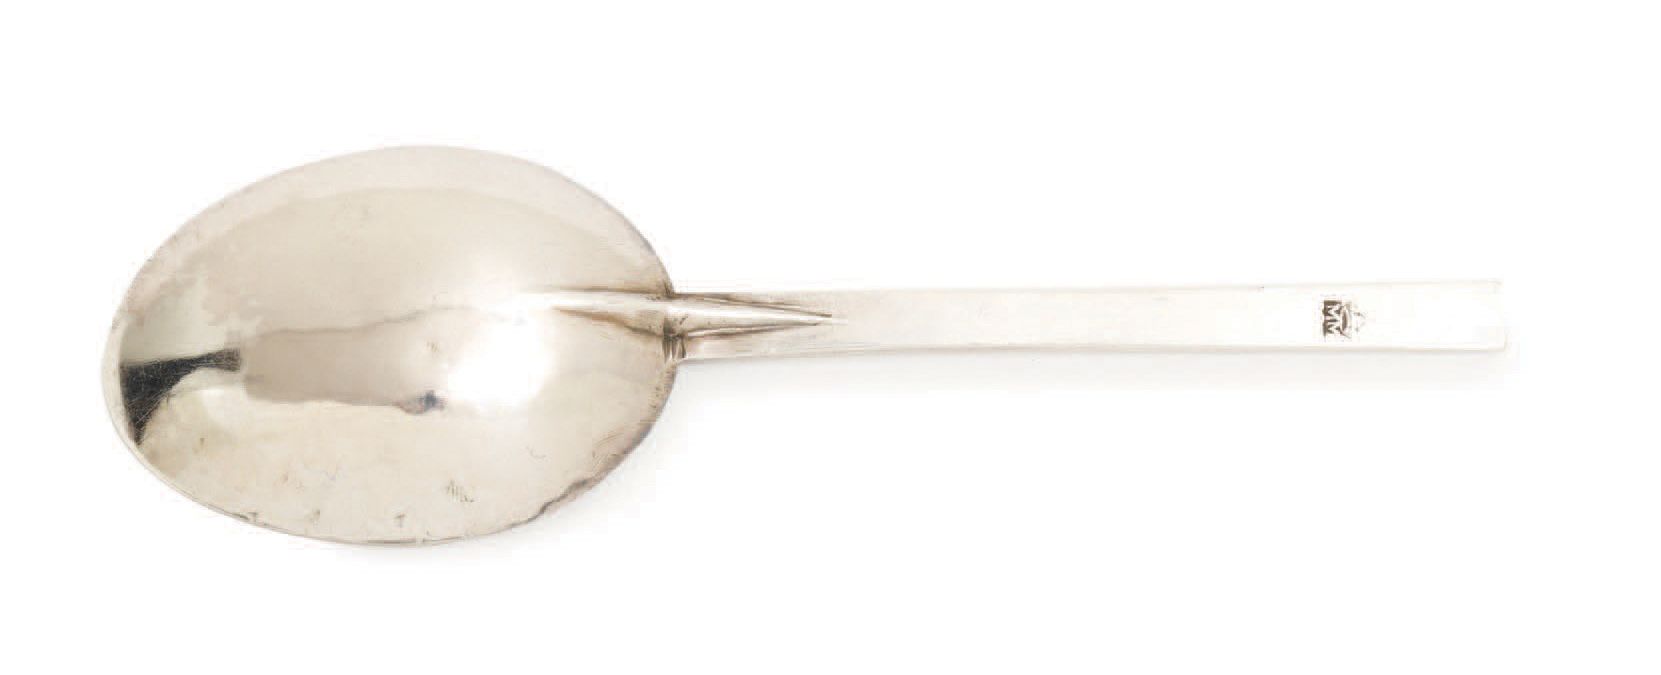 Null SILVER SPOON Liège or one of the "good cities", circa 1675-1685
Master silv&hellip;